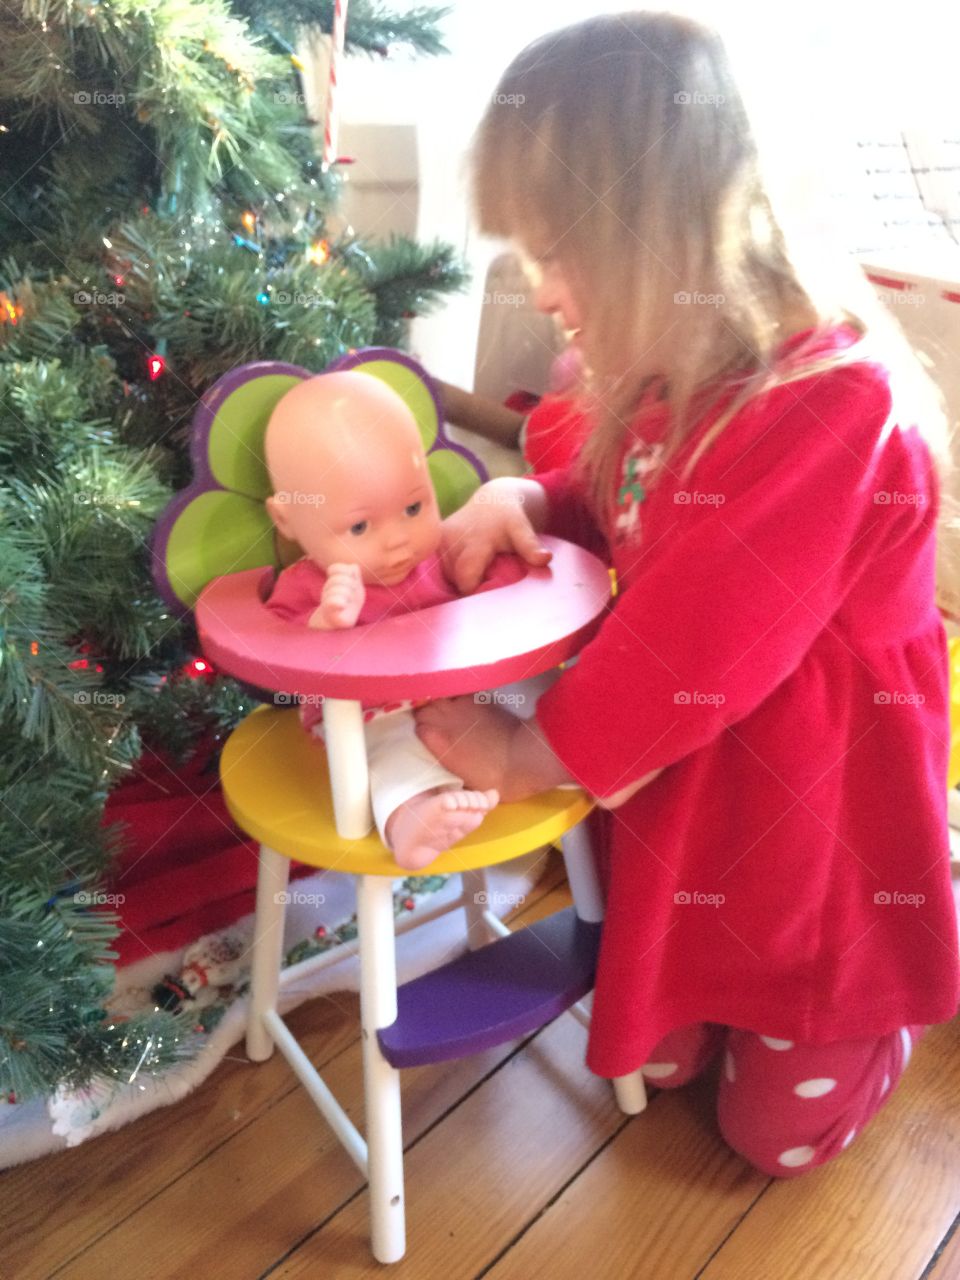 You g rl with Down syndrome playing with doll by Christmas tree